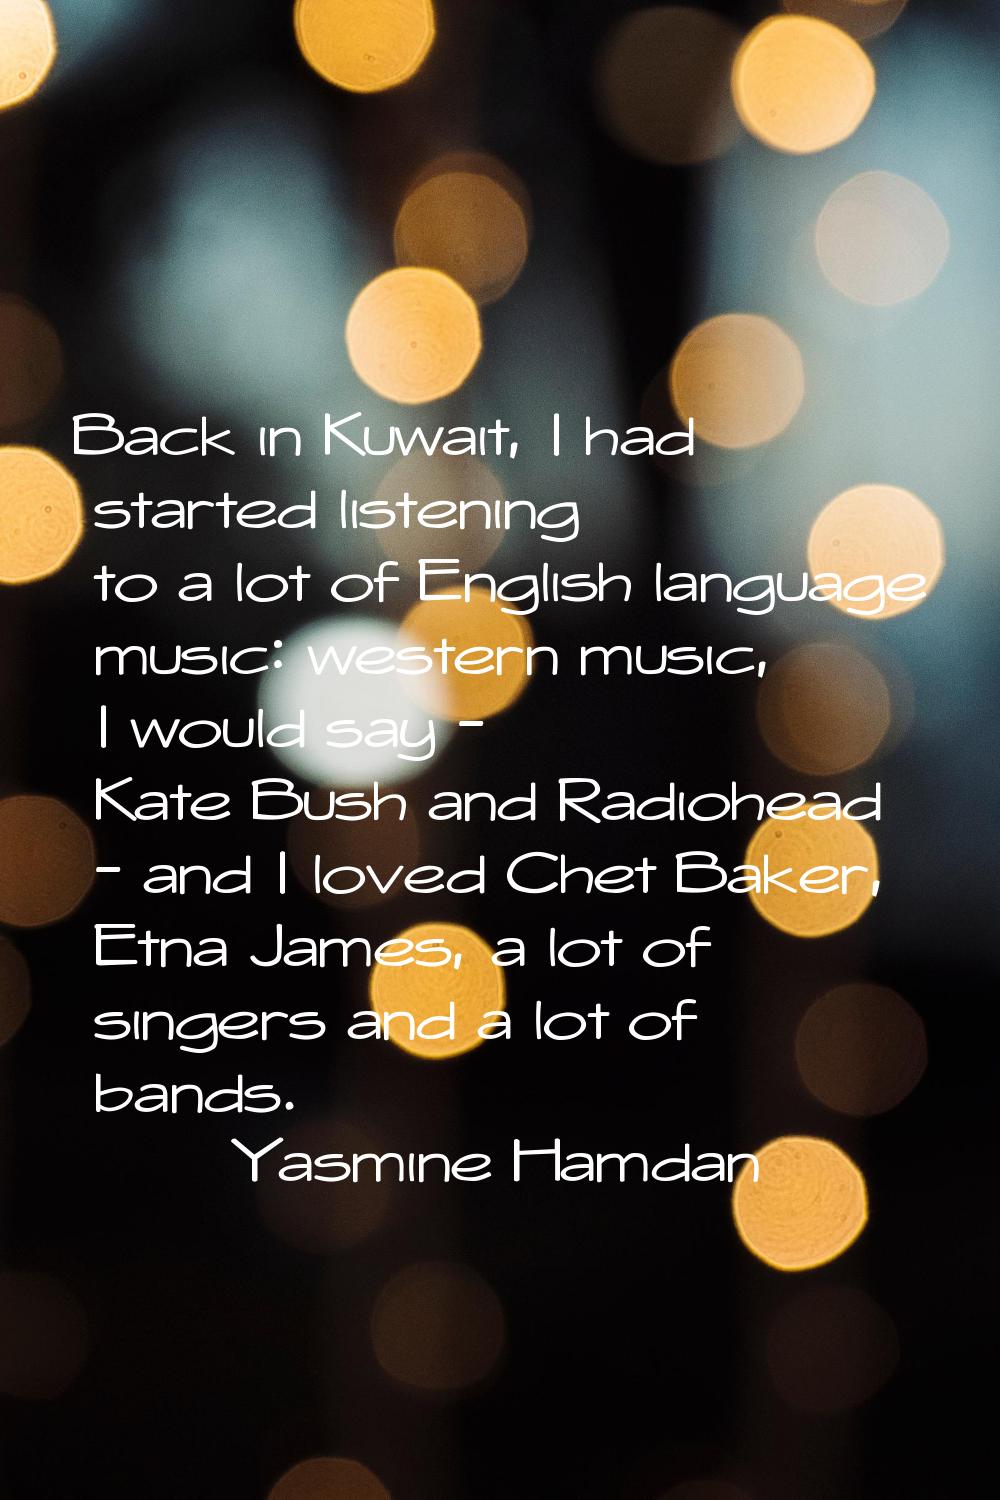 Back in Kuwait, I had started listening to a lot of English language music: western music, I would 